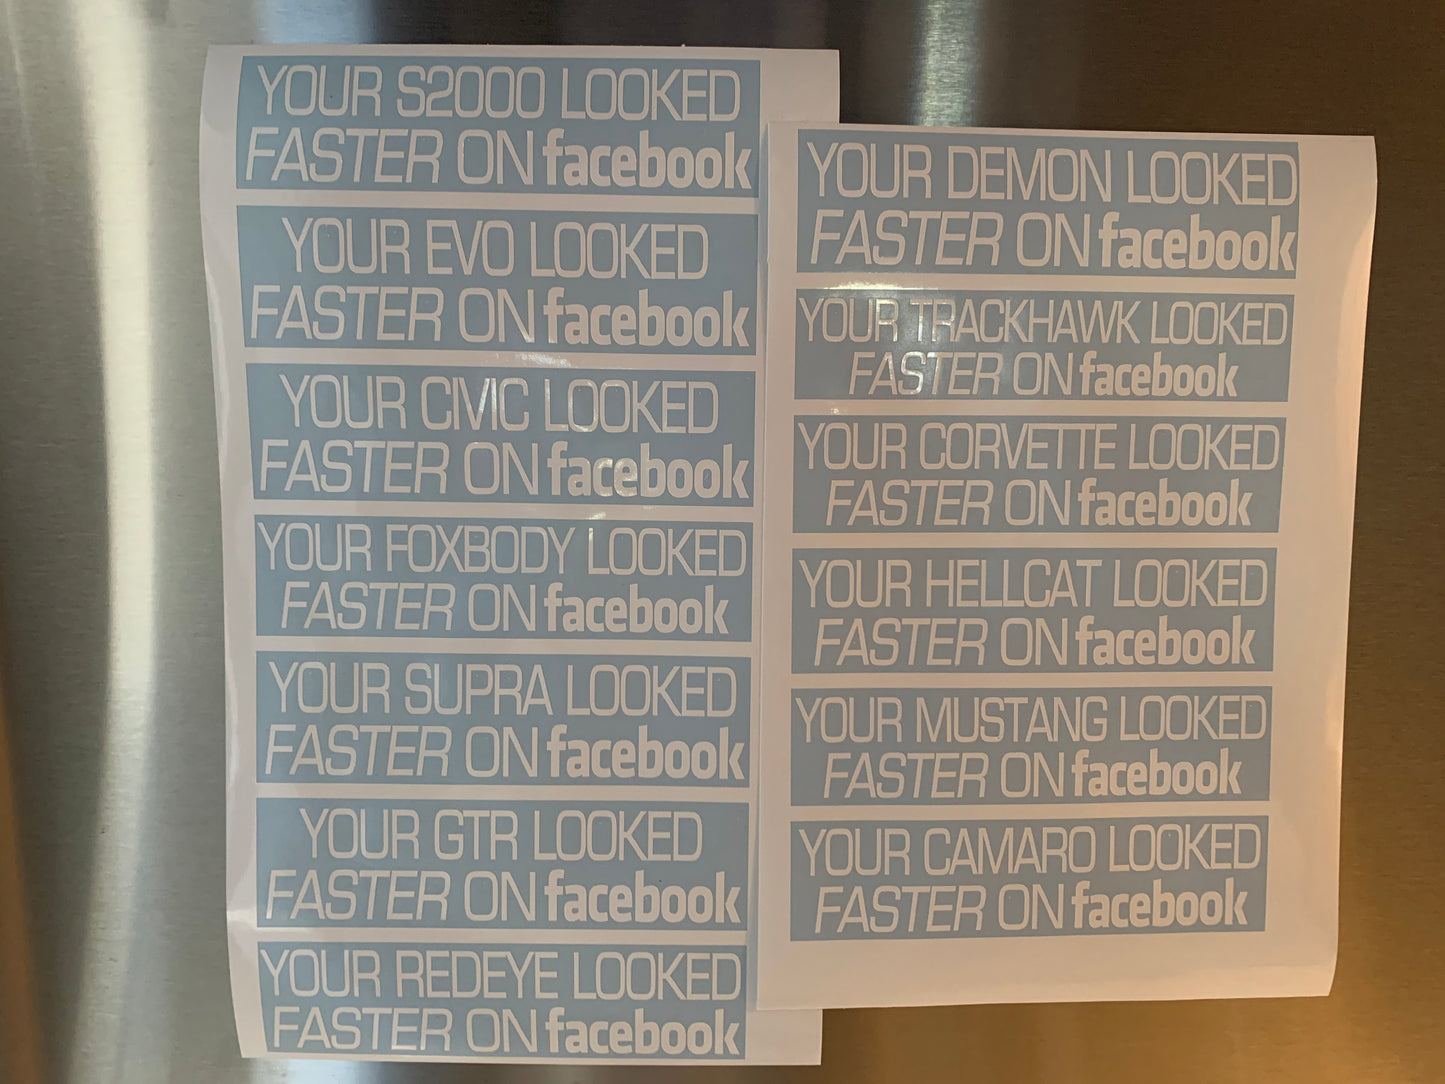 Your "CAR" Looked Faster on Facebook Di-Cut